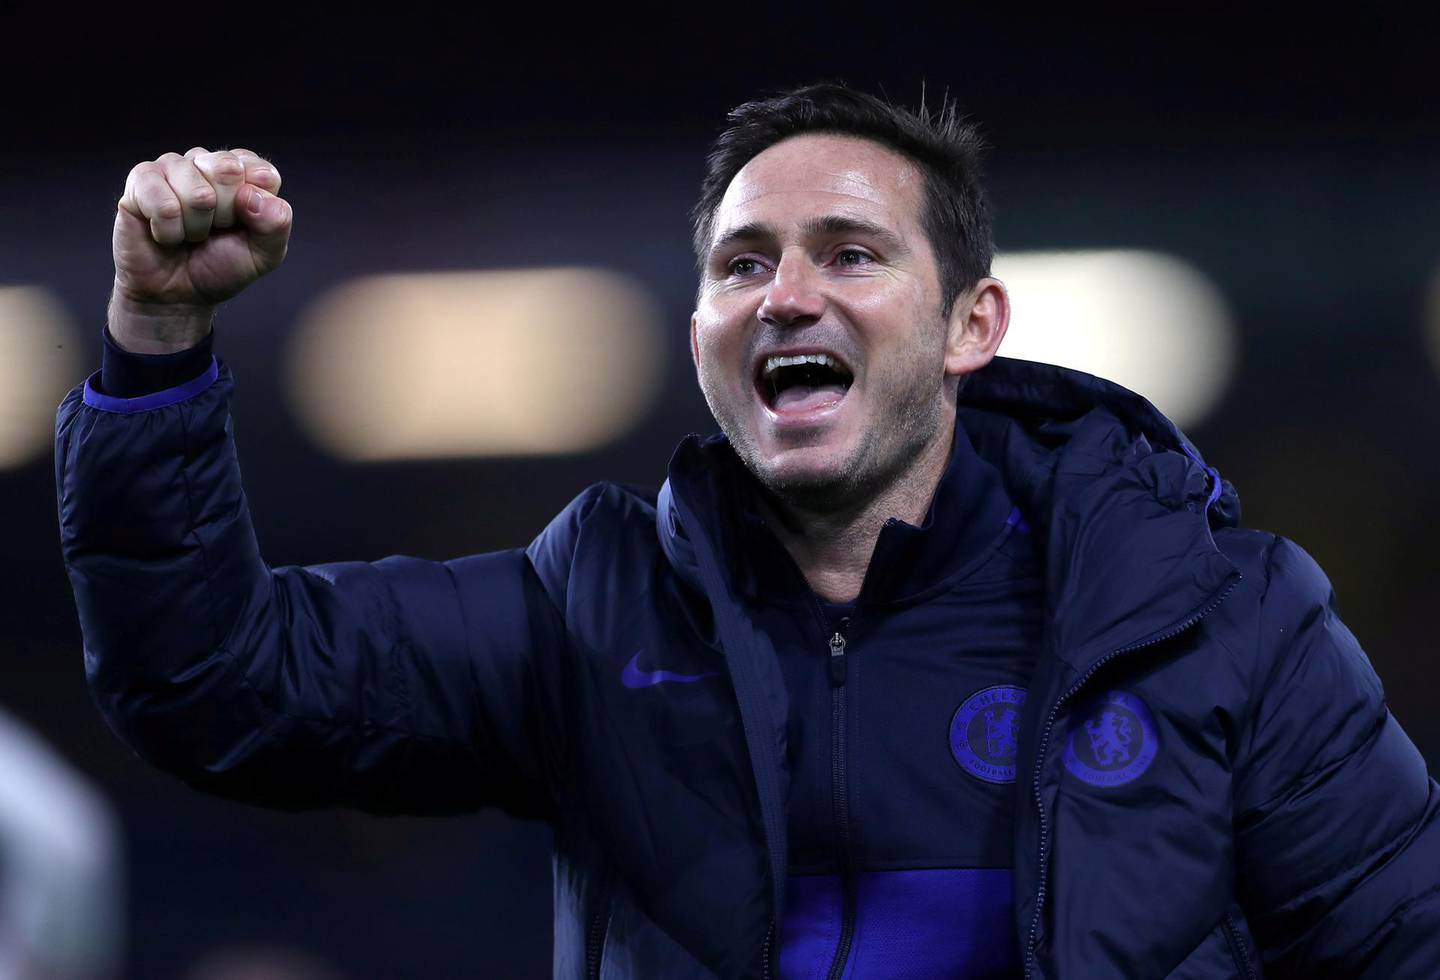 FILE PHOTO: Soccer Football - Premier League - Burnley v Chelsea - Turf Moor, Burnley, Britain - October 26, 2019  Chelsea manager Frank Lampard celebrates after the match   Action Images via Reuters/Lee Smith  EDITORIAL USE ONLY. No use with unauthorized audio, video, data, fixture lists, club/league logos or "live" services. Online in-match use limited to 75 images, no video emulation. No use in betting, games or single club/league/player publications.  Please contact your account representative for further details./File Photo